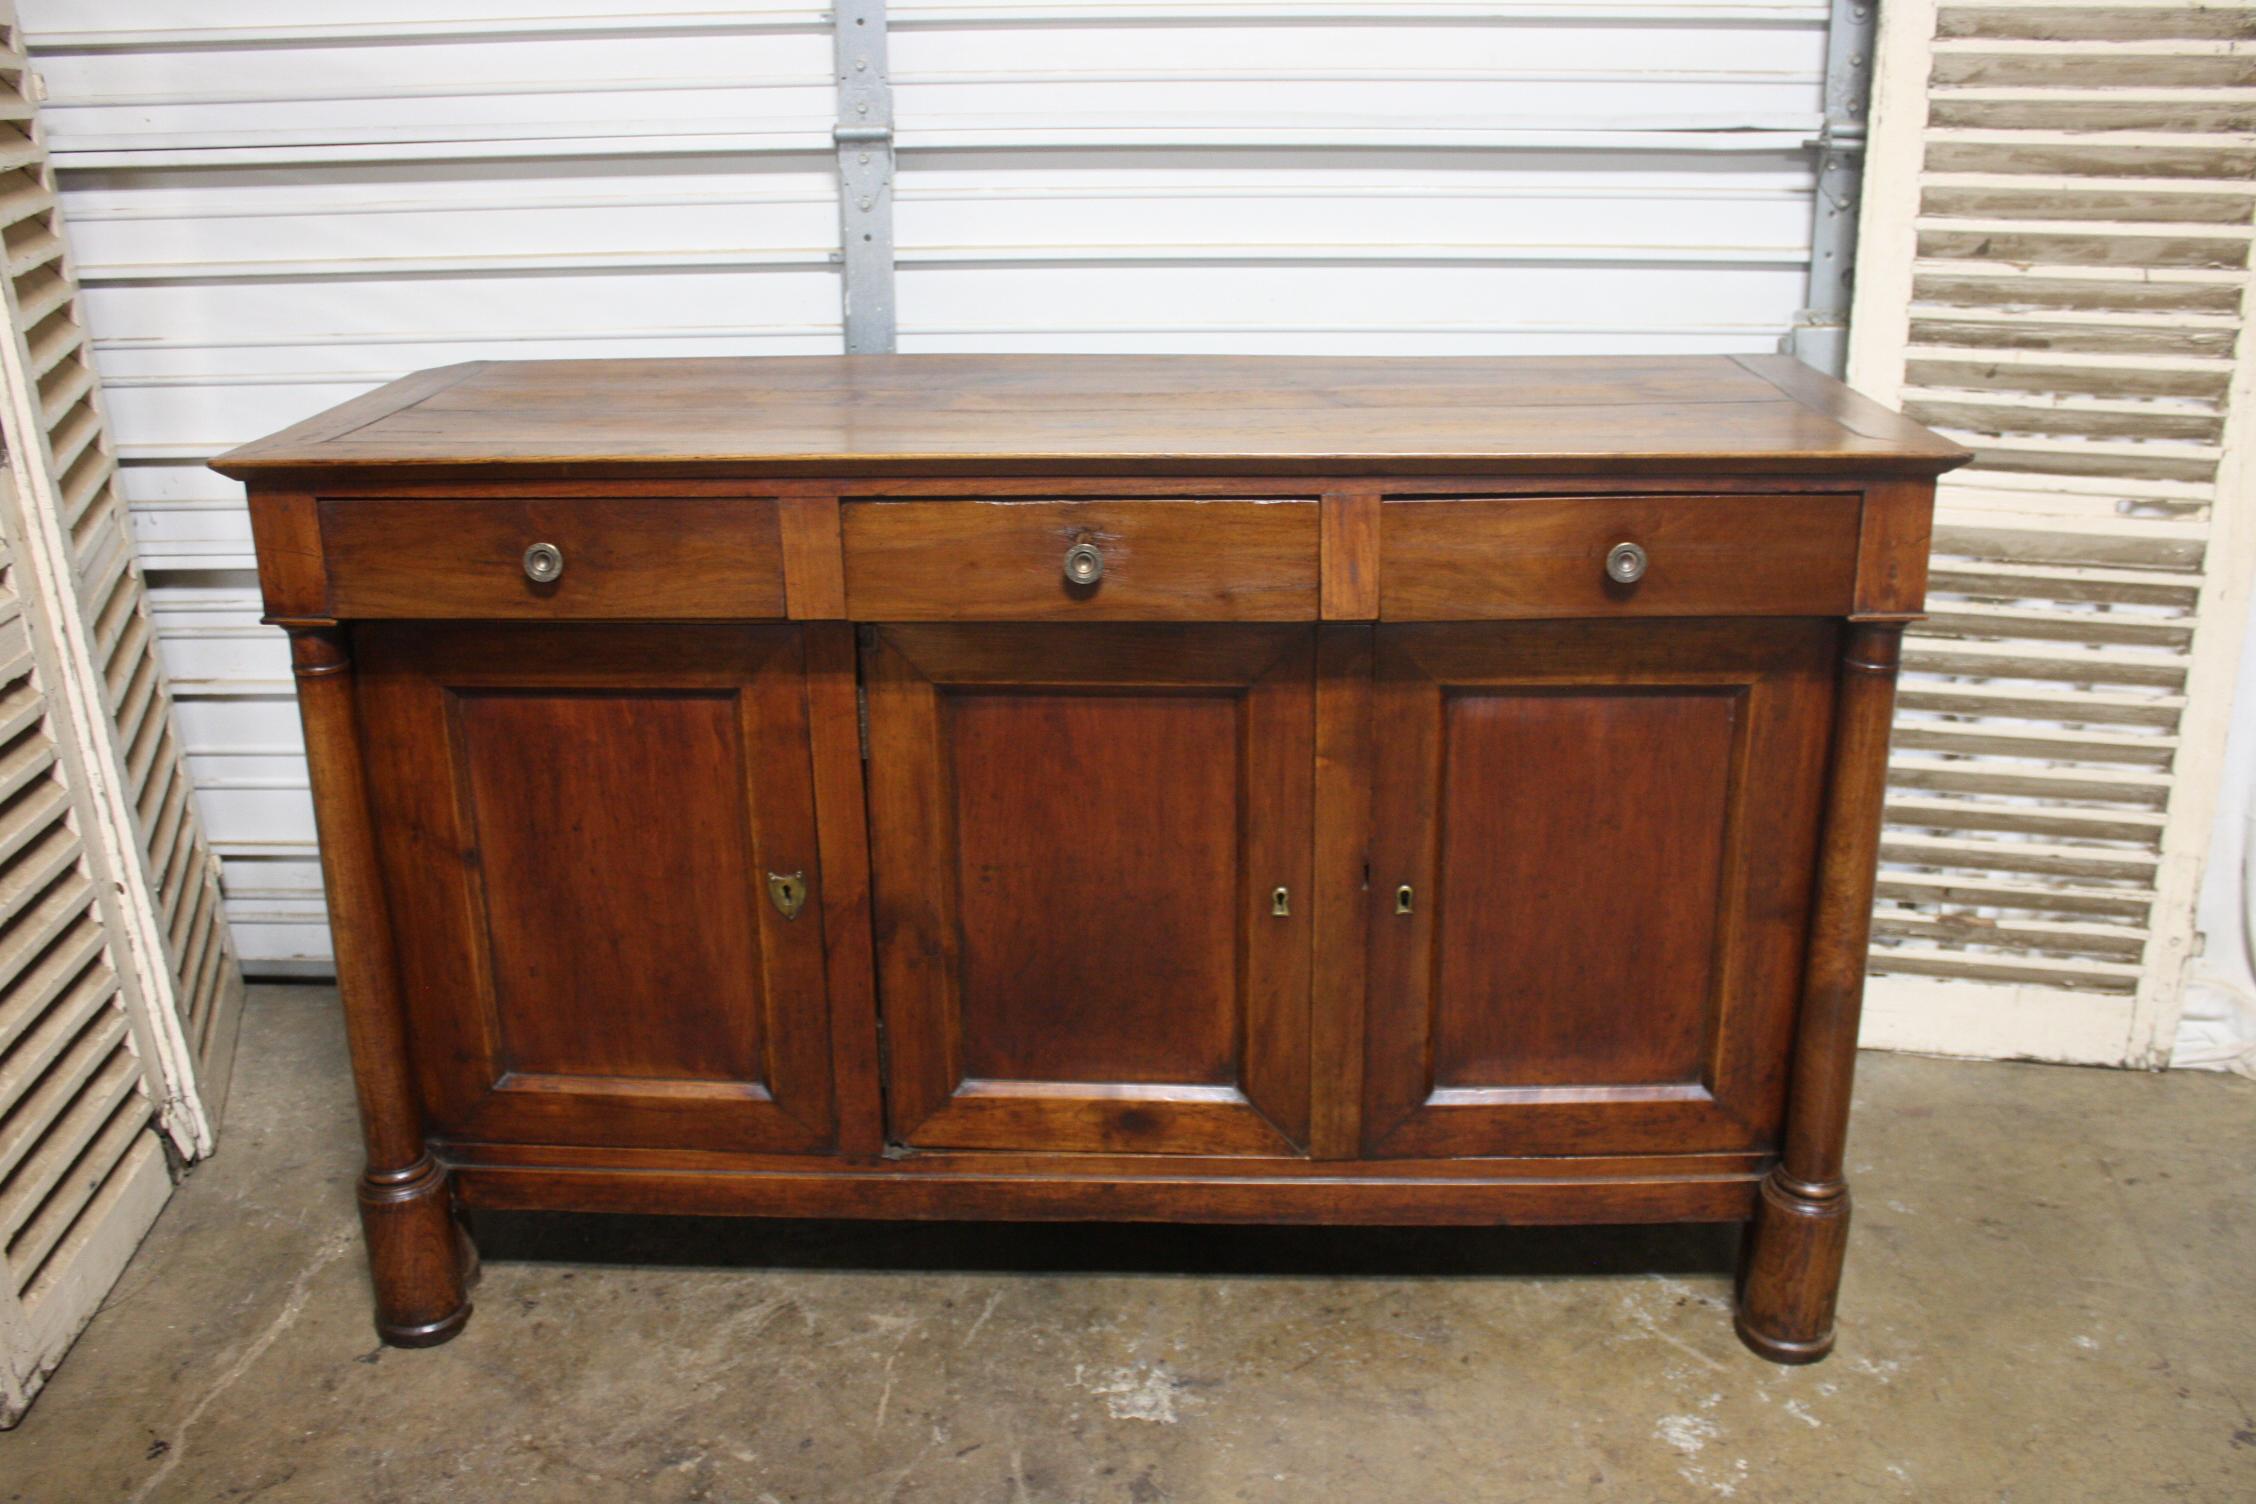 This beautiful sideboard has a wonderful patine and nice proportion.
The doors can be pushed completely to each side.